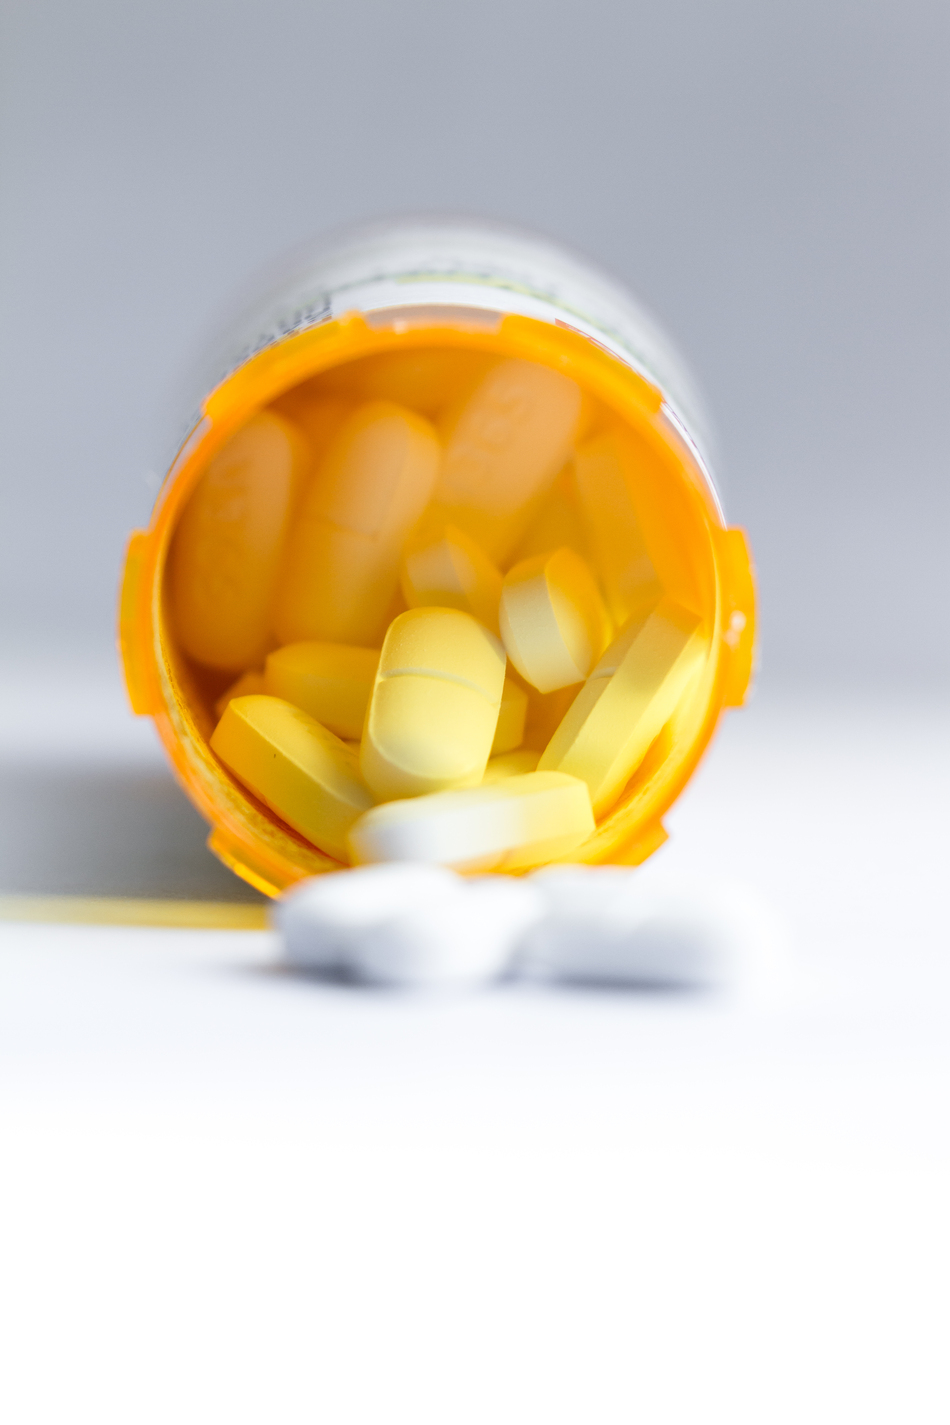 Protect Yourself From Opioid Addiction By Asking Your Doctor These Questions